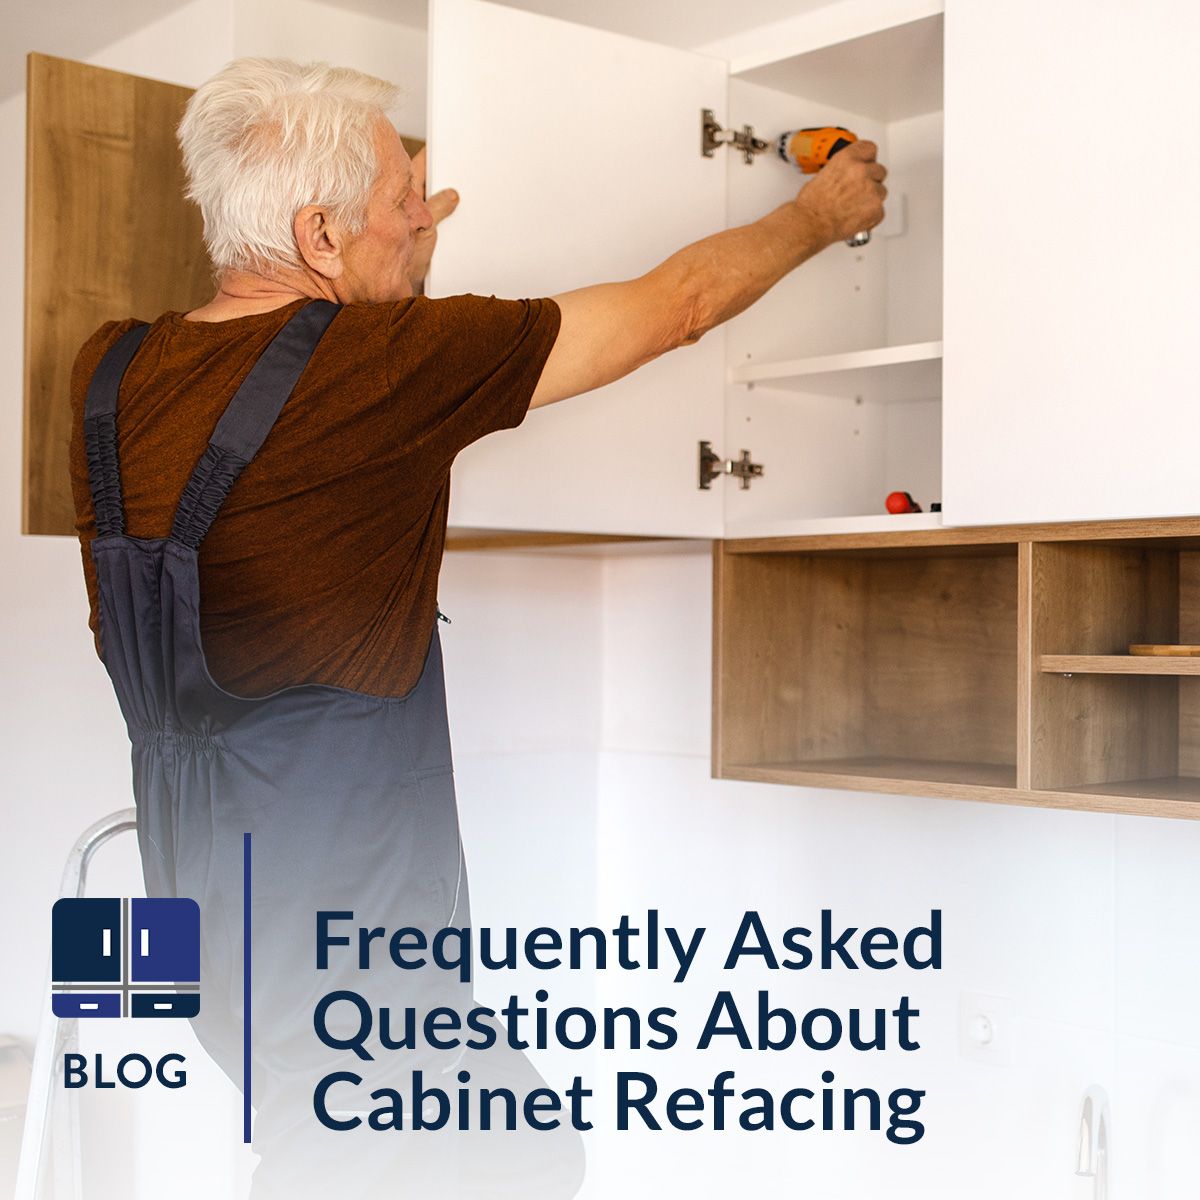 Frequently Asked Questions About Cabinet Refacing